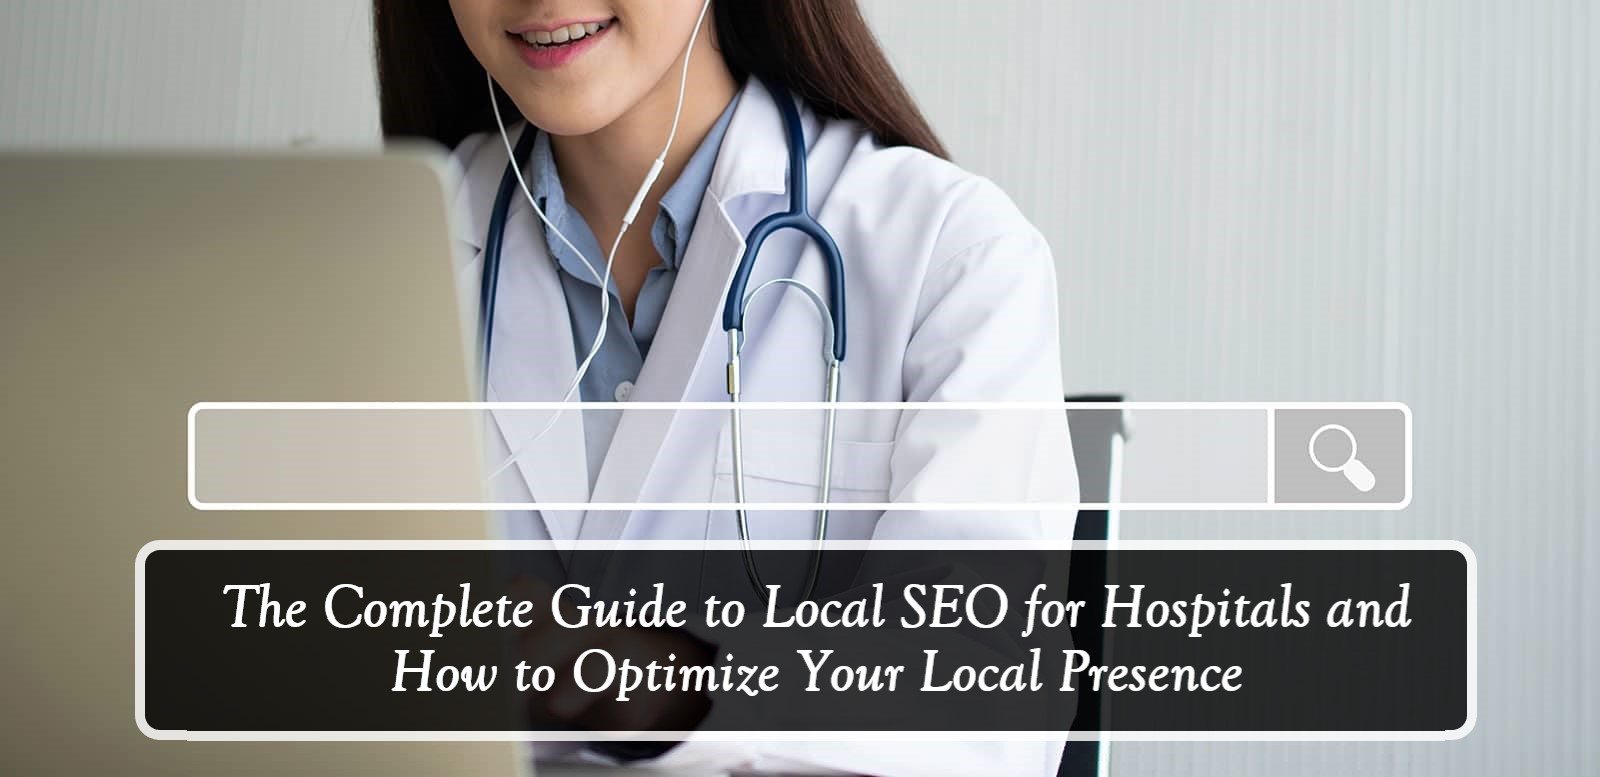 The Complete Guide to Local SEO for Hospitals and How to Optimize Your Local Presence